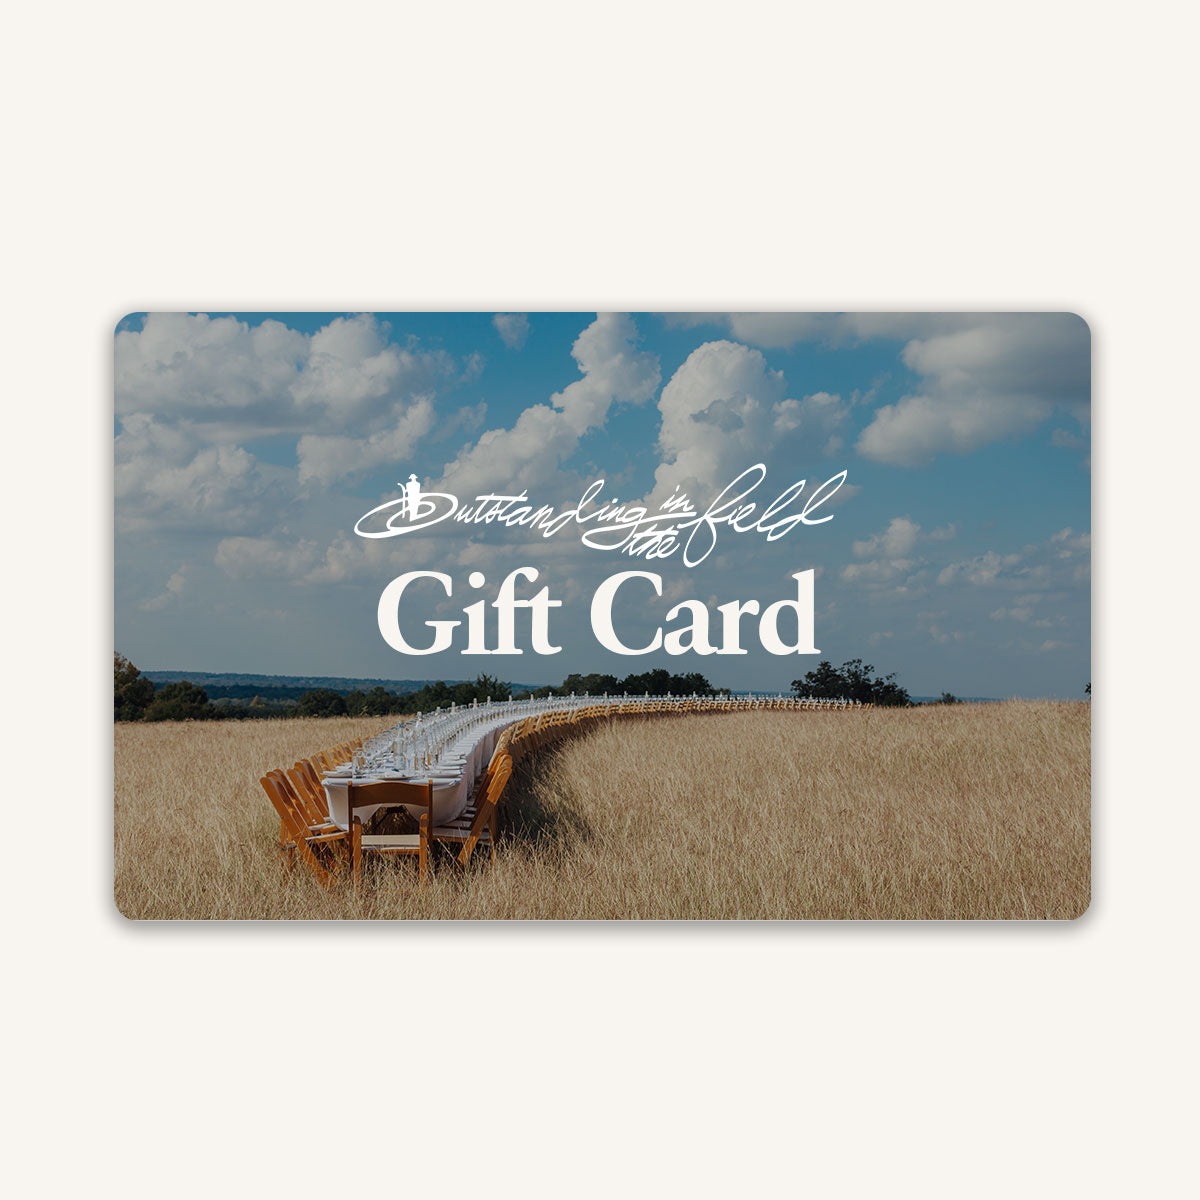 Outstanding in the Field Gift Card